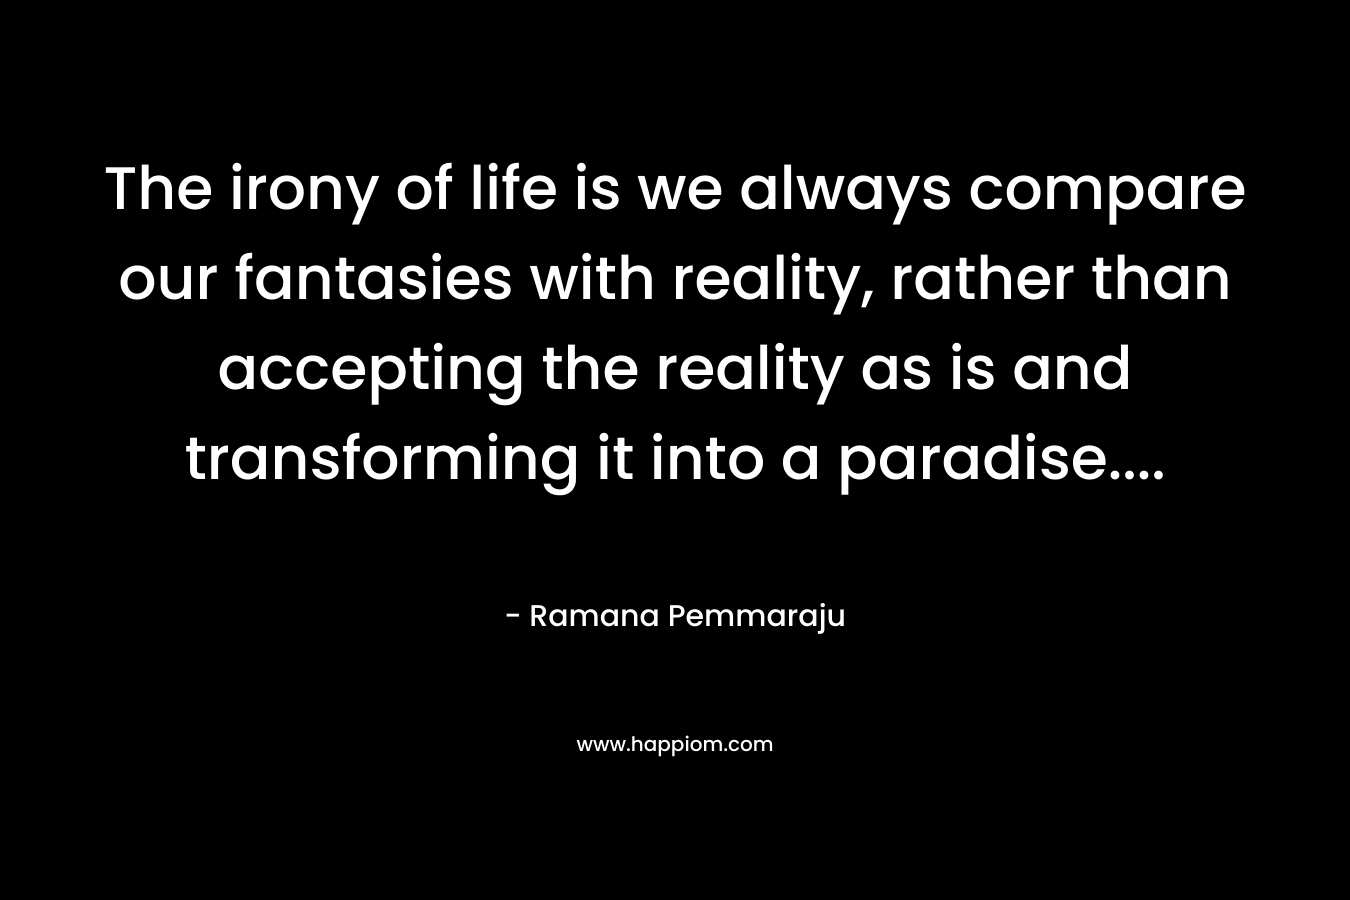 The irony of life is we always compare our fantasies with reality, rather than accepting the reality as is and transforming it into a paradise....